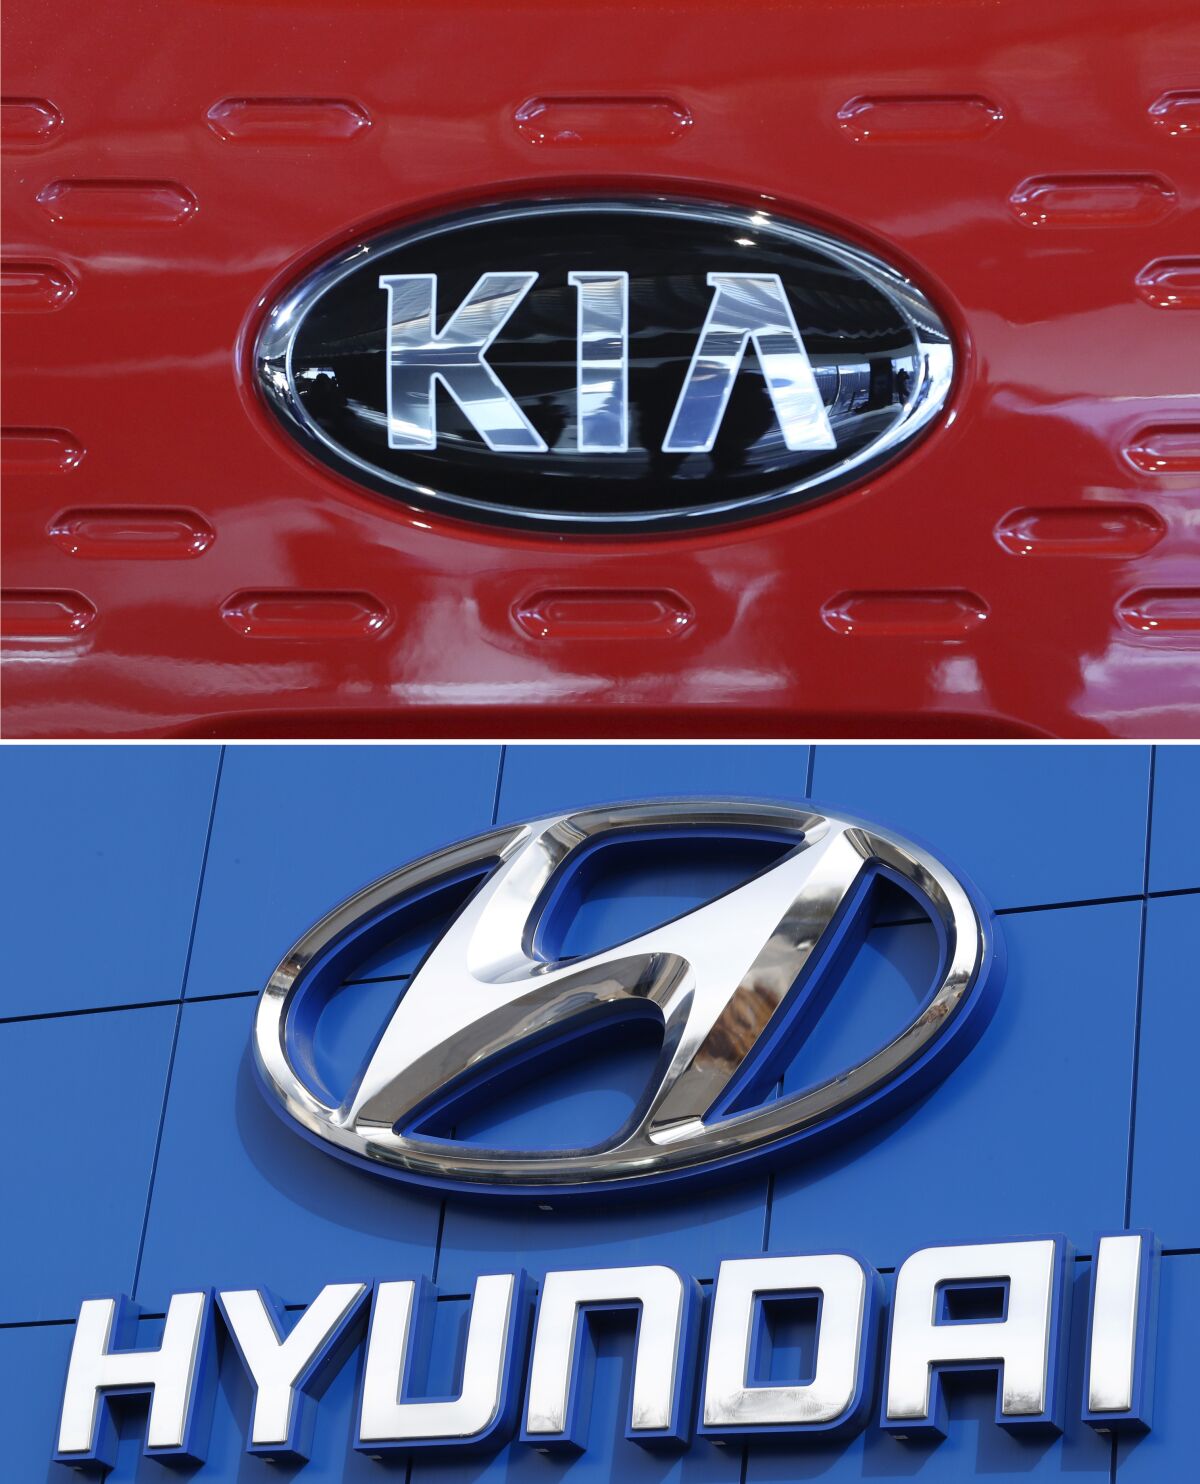 FILE- This combination of file photos shows the logo of Kia Motors, top and Hyundai logo, bottom. The U.S. government's road safety agency has paid more than $24 million to a whistleblower who reported that Hyundai and Kia moved too slowly to recall over 1 million vehicles with engines that could freeze up or catch fire. The National Highway Traffic Safety Administration says the award is the first it has paid to a whistleblower. The penalties from both automakers totaled $81 million. The agency didn't identify the whistleblower in a statement Tuesday, Nov. 9, 2021 announcing the payment. (AP Photo, File)